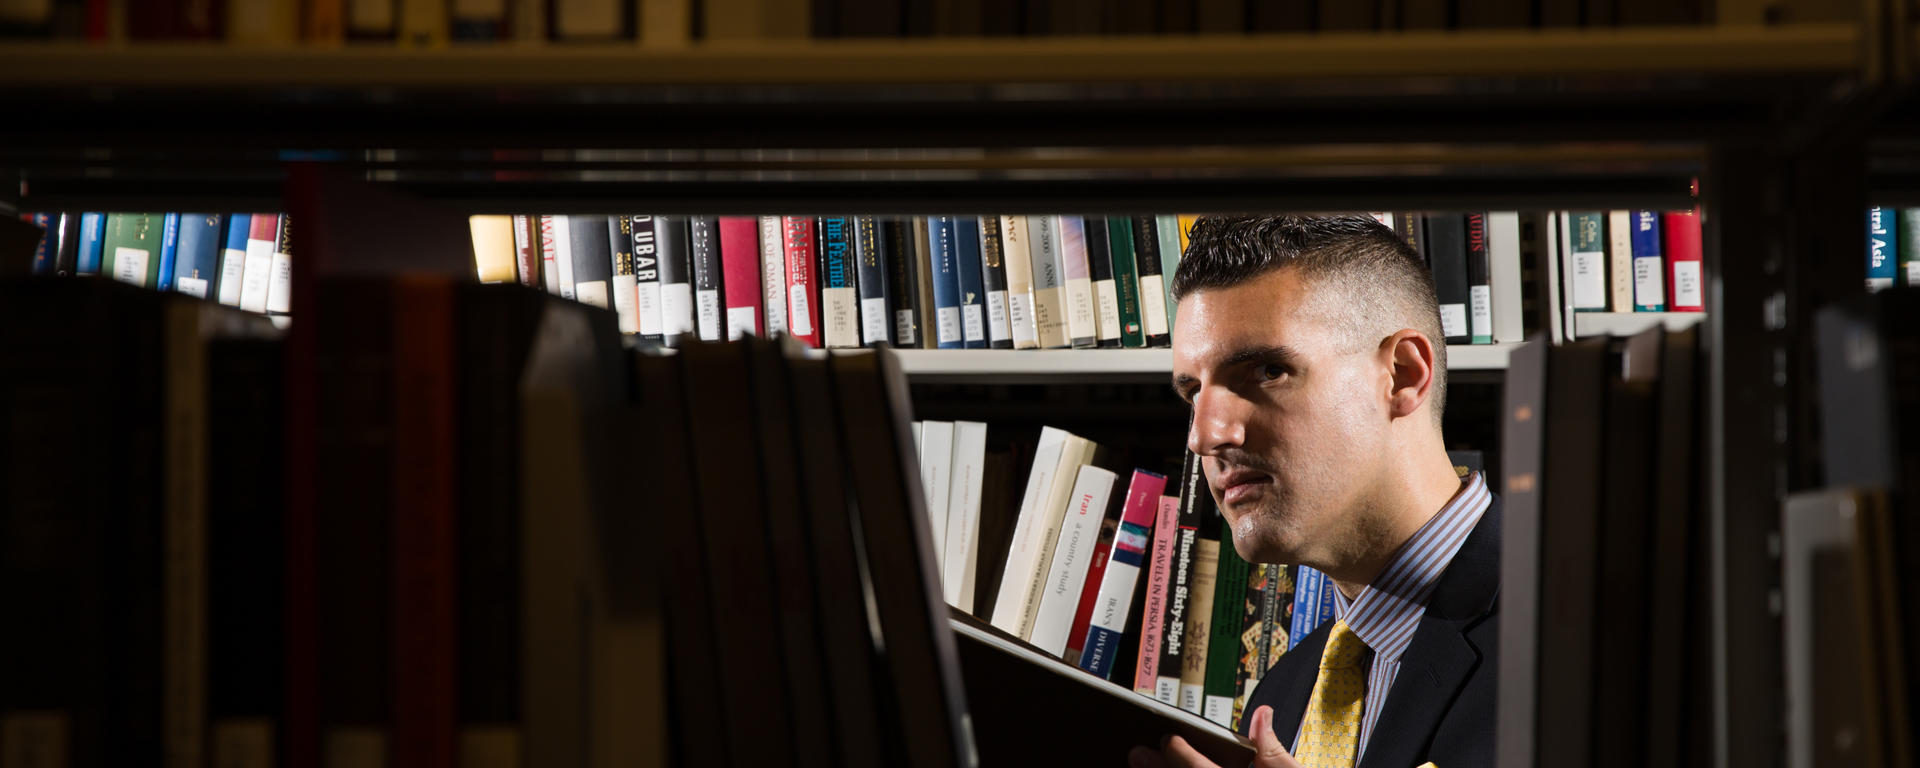 PhD in English Literature, Dr. Anthony Camara is seen through the stacks of books in the library